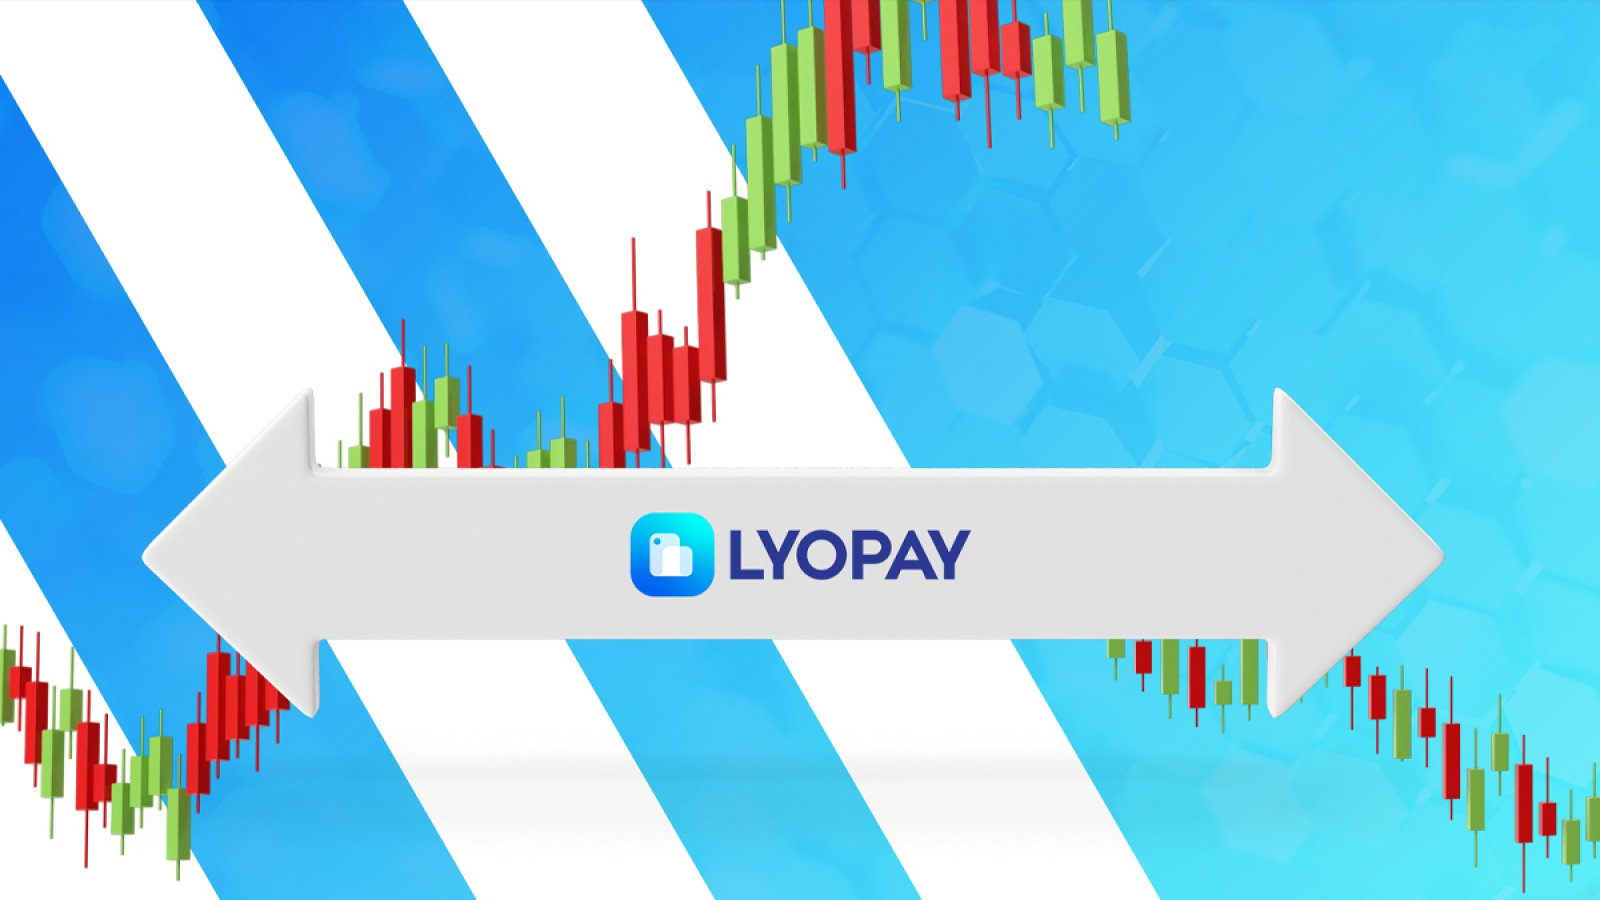 Lyopay: The All in One Application for your Daily Crypto Life